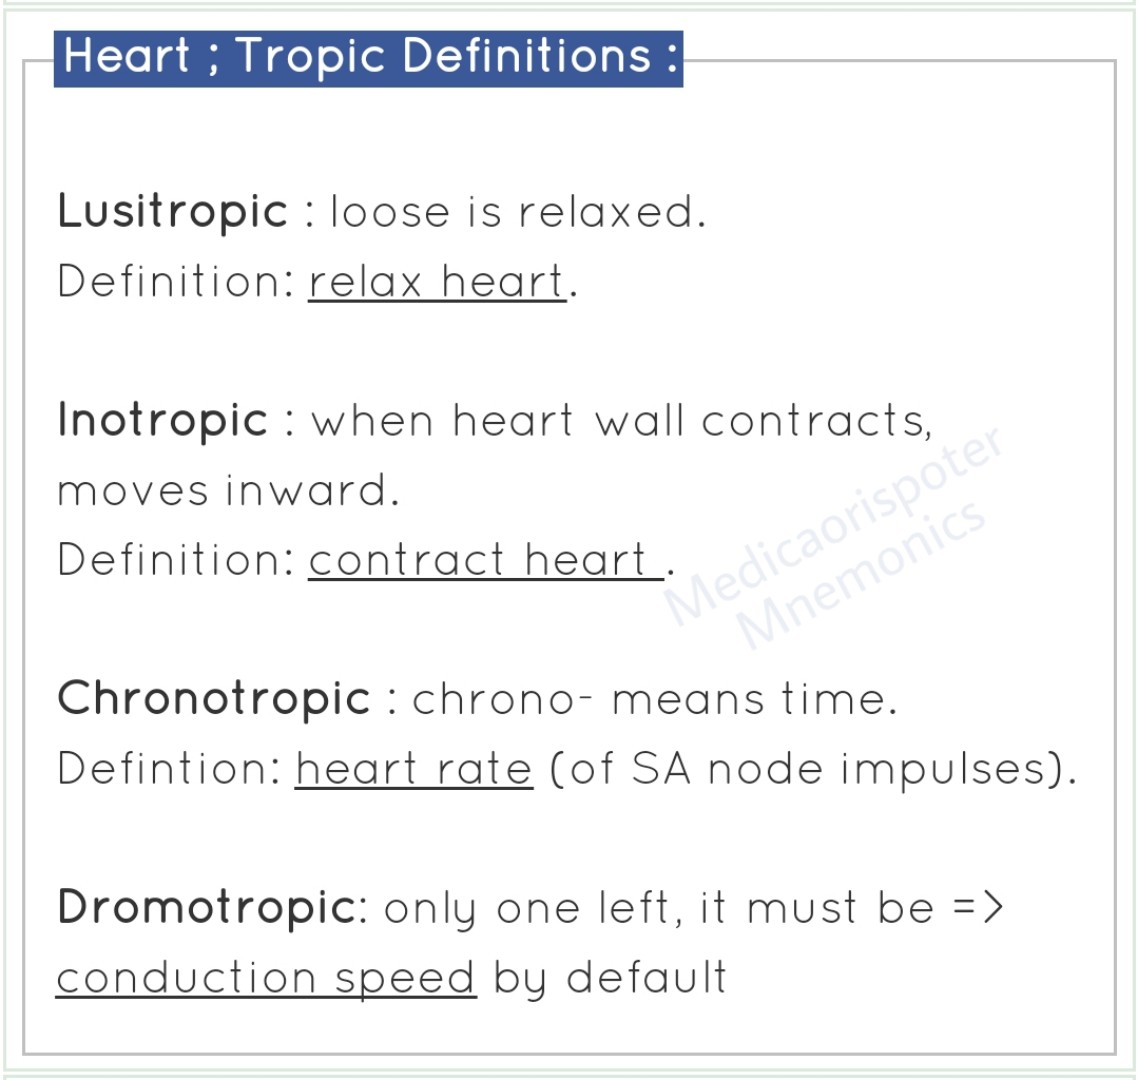 preview of Tropic Definitions of Heart.jpg